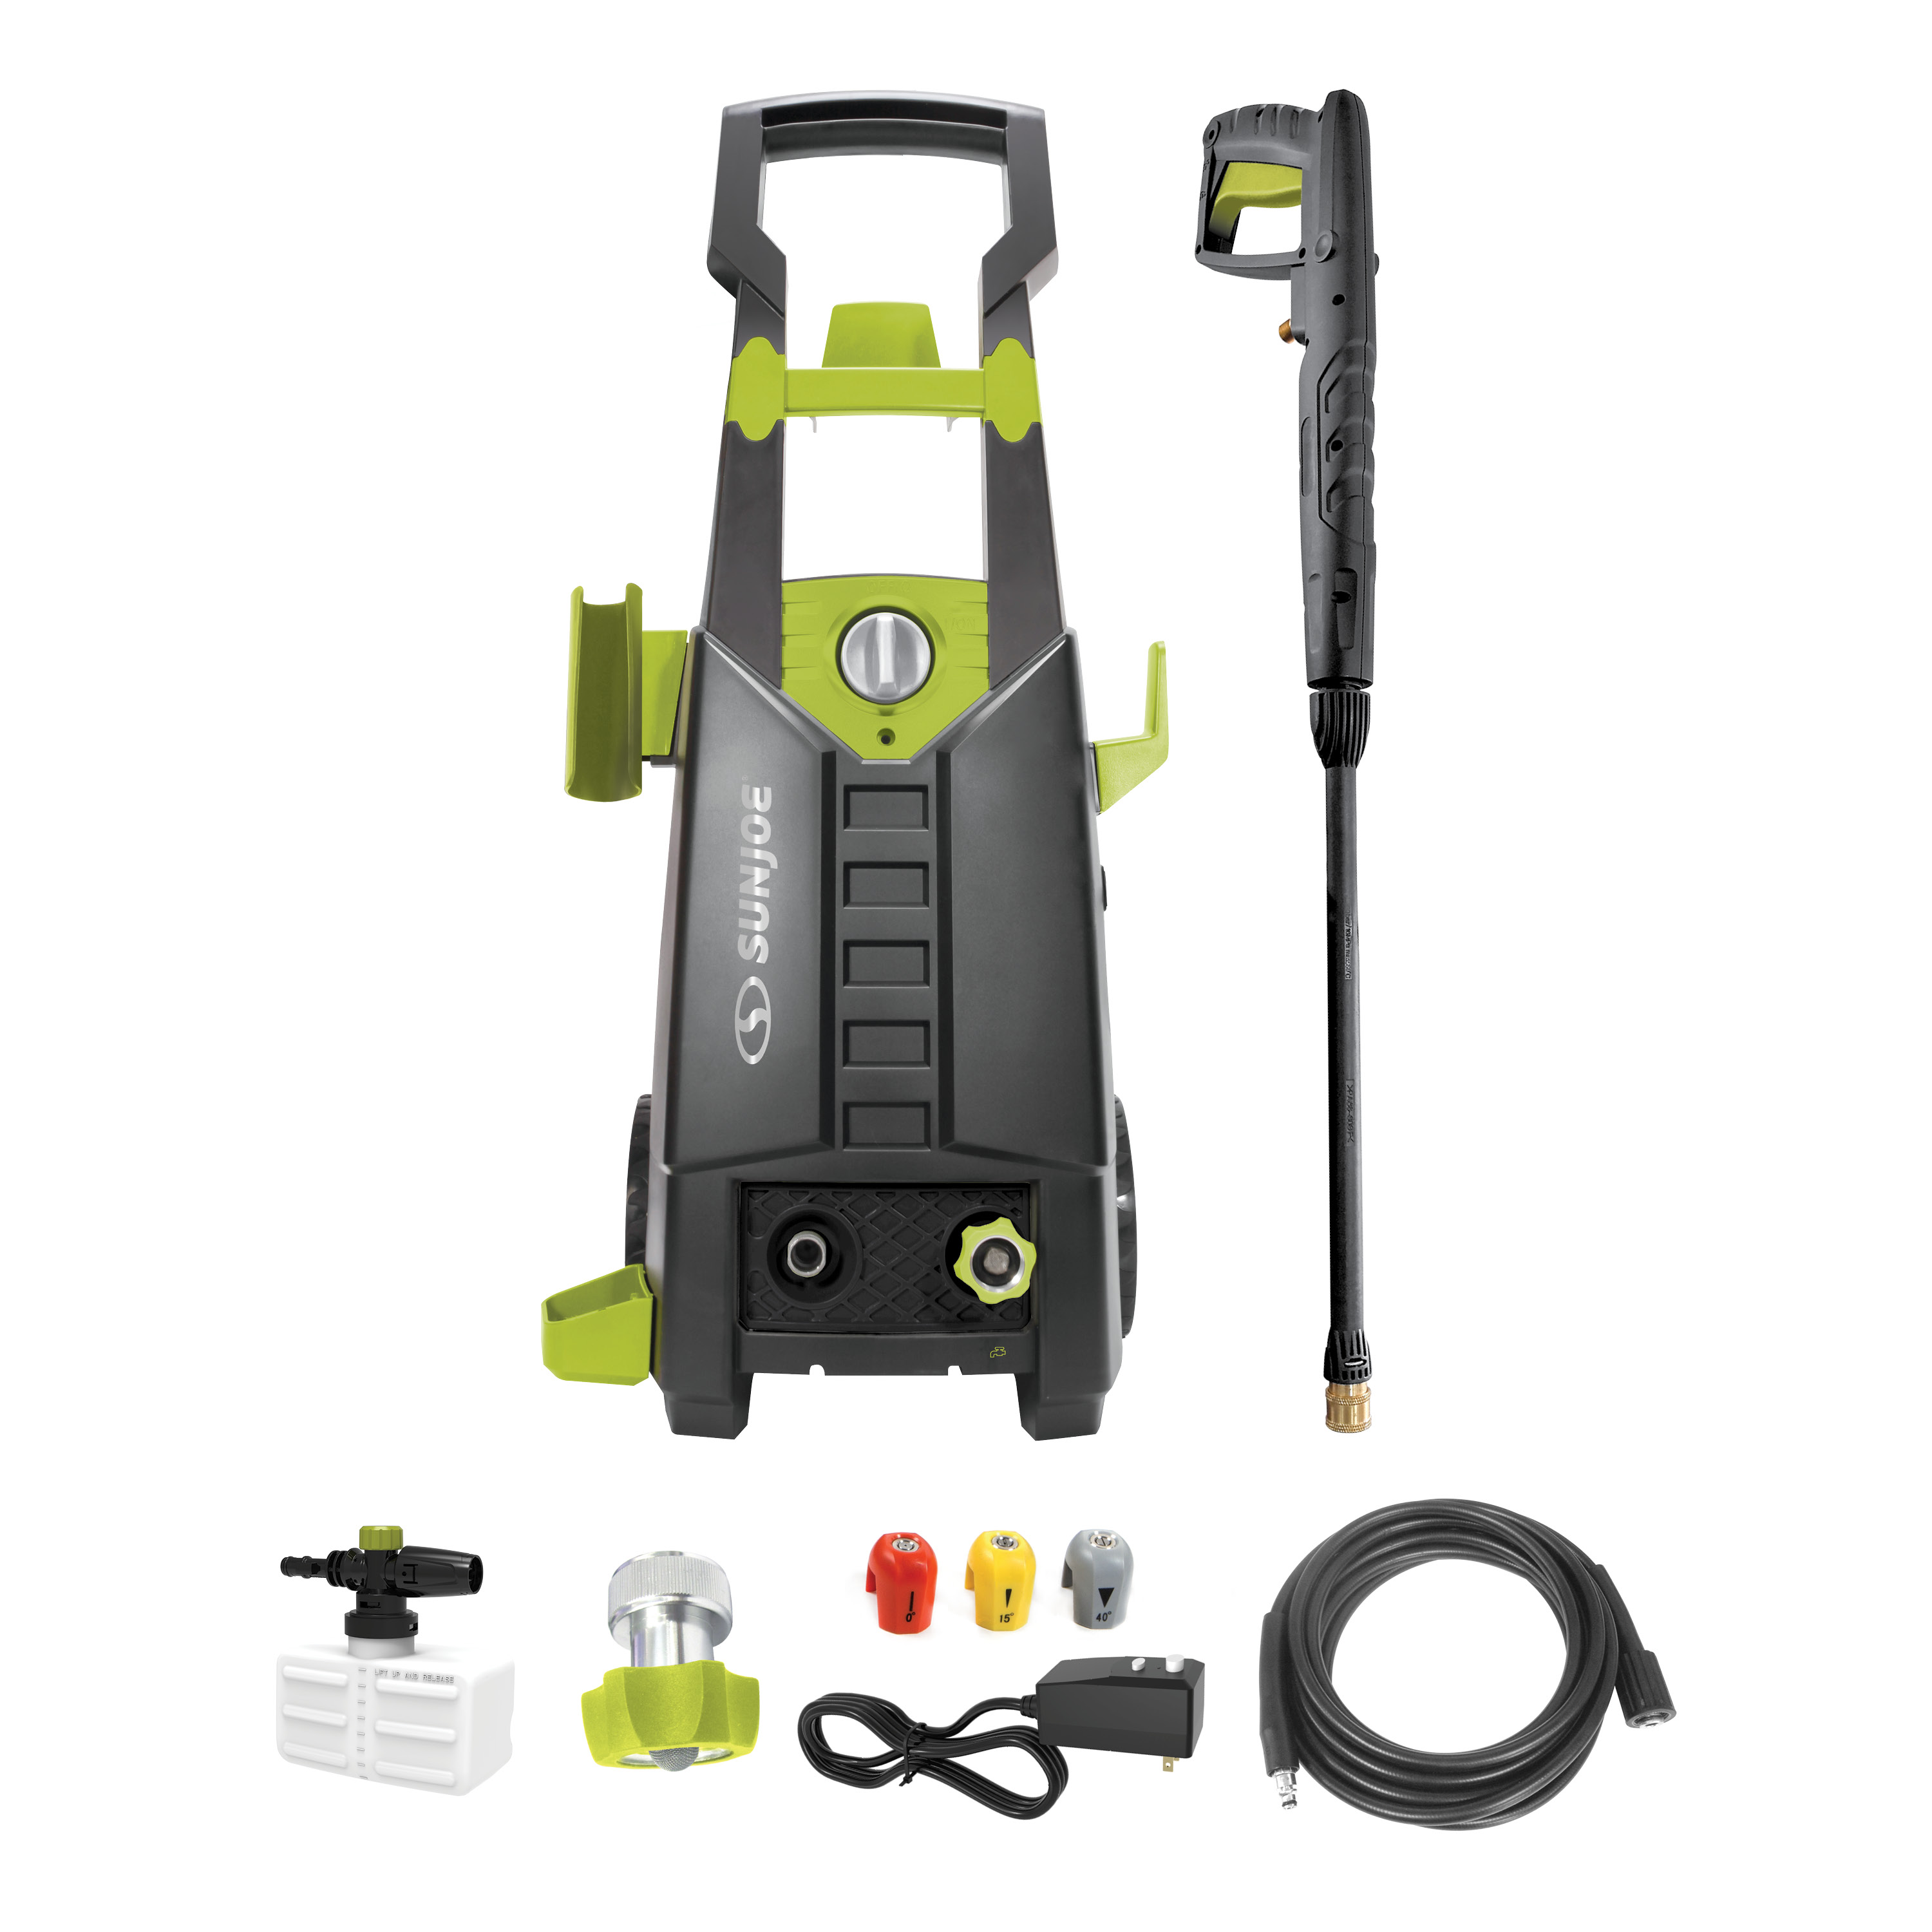 Sun Joe SPX2688-MAX Electric Pressure Washer, 13-Amp, Foam Cannon, Quick-Connect Tips - image 5 of 6